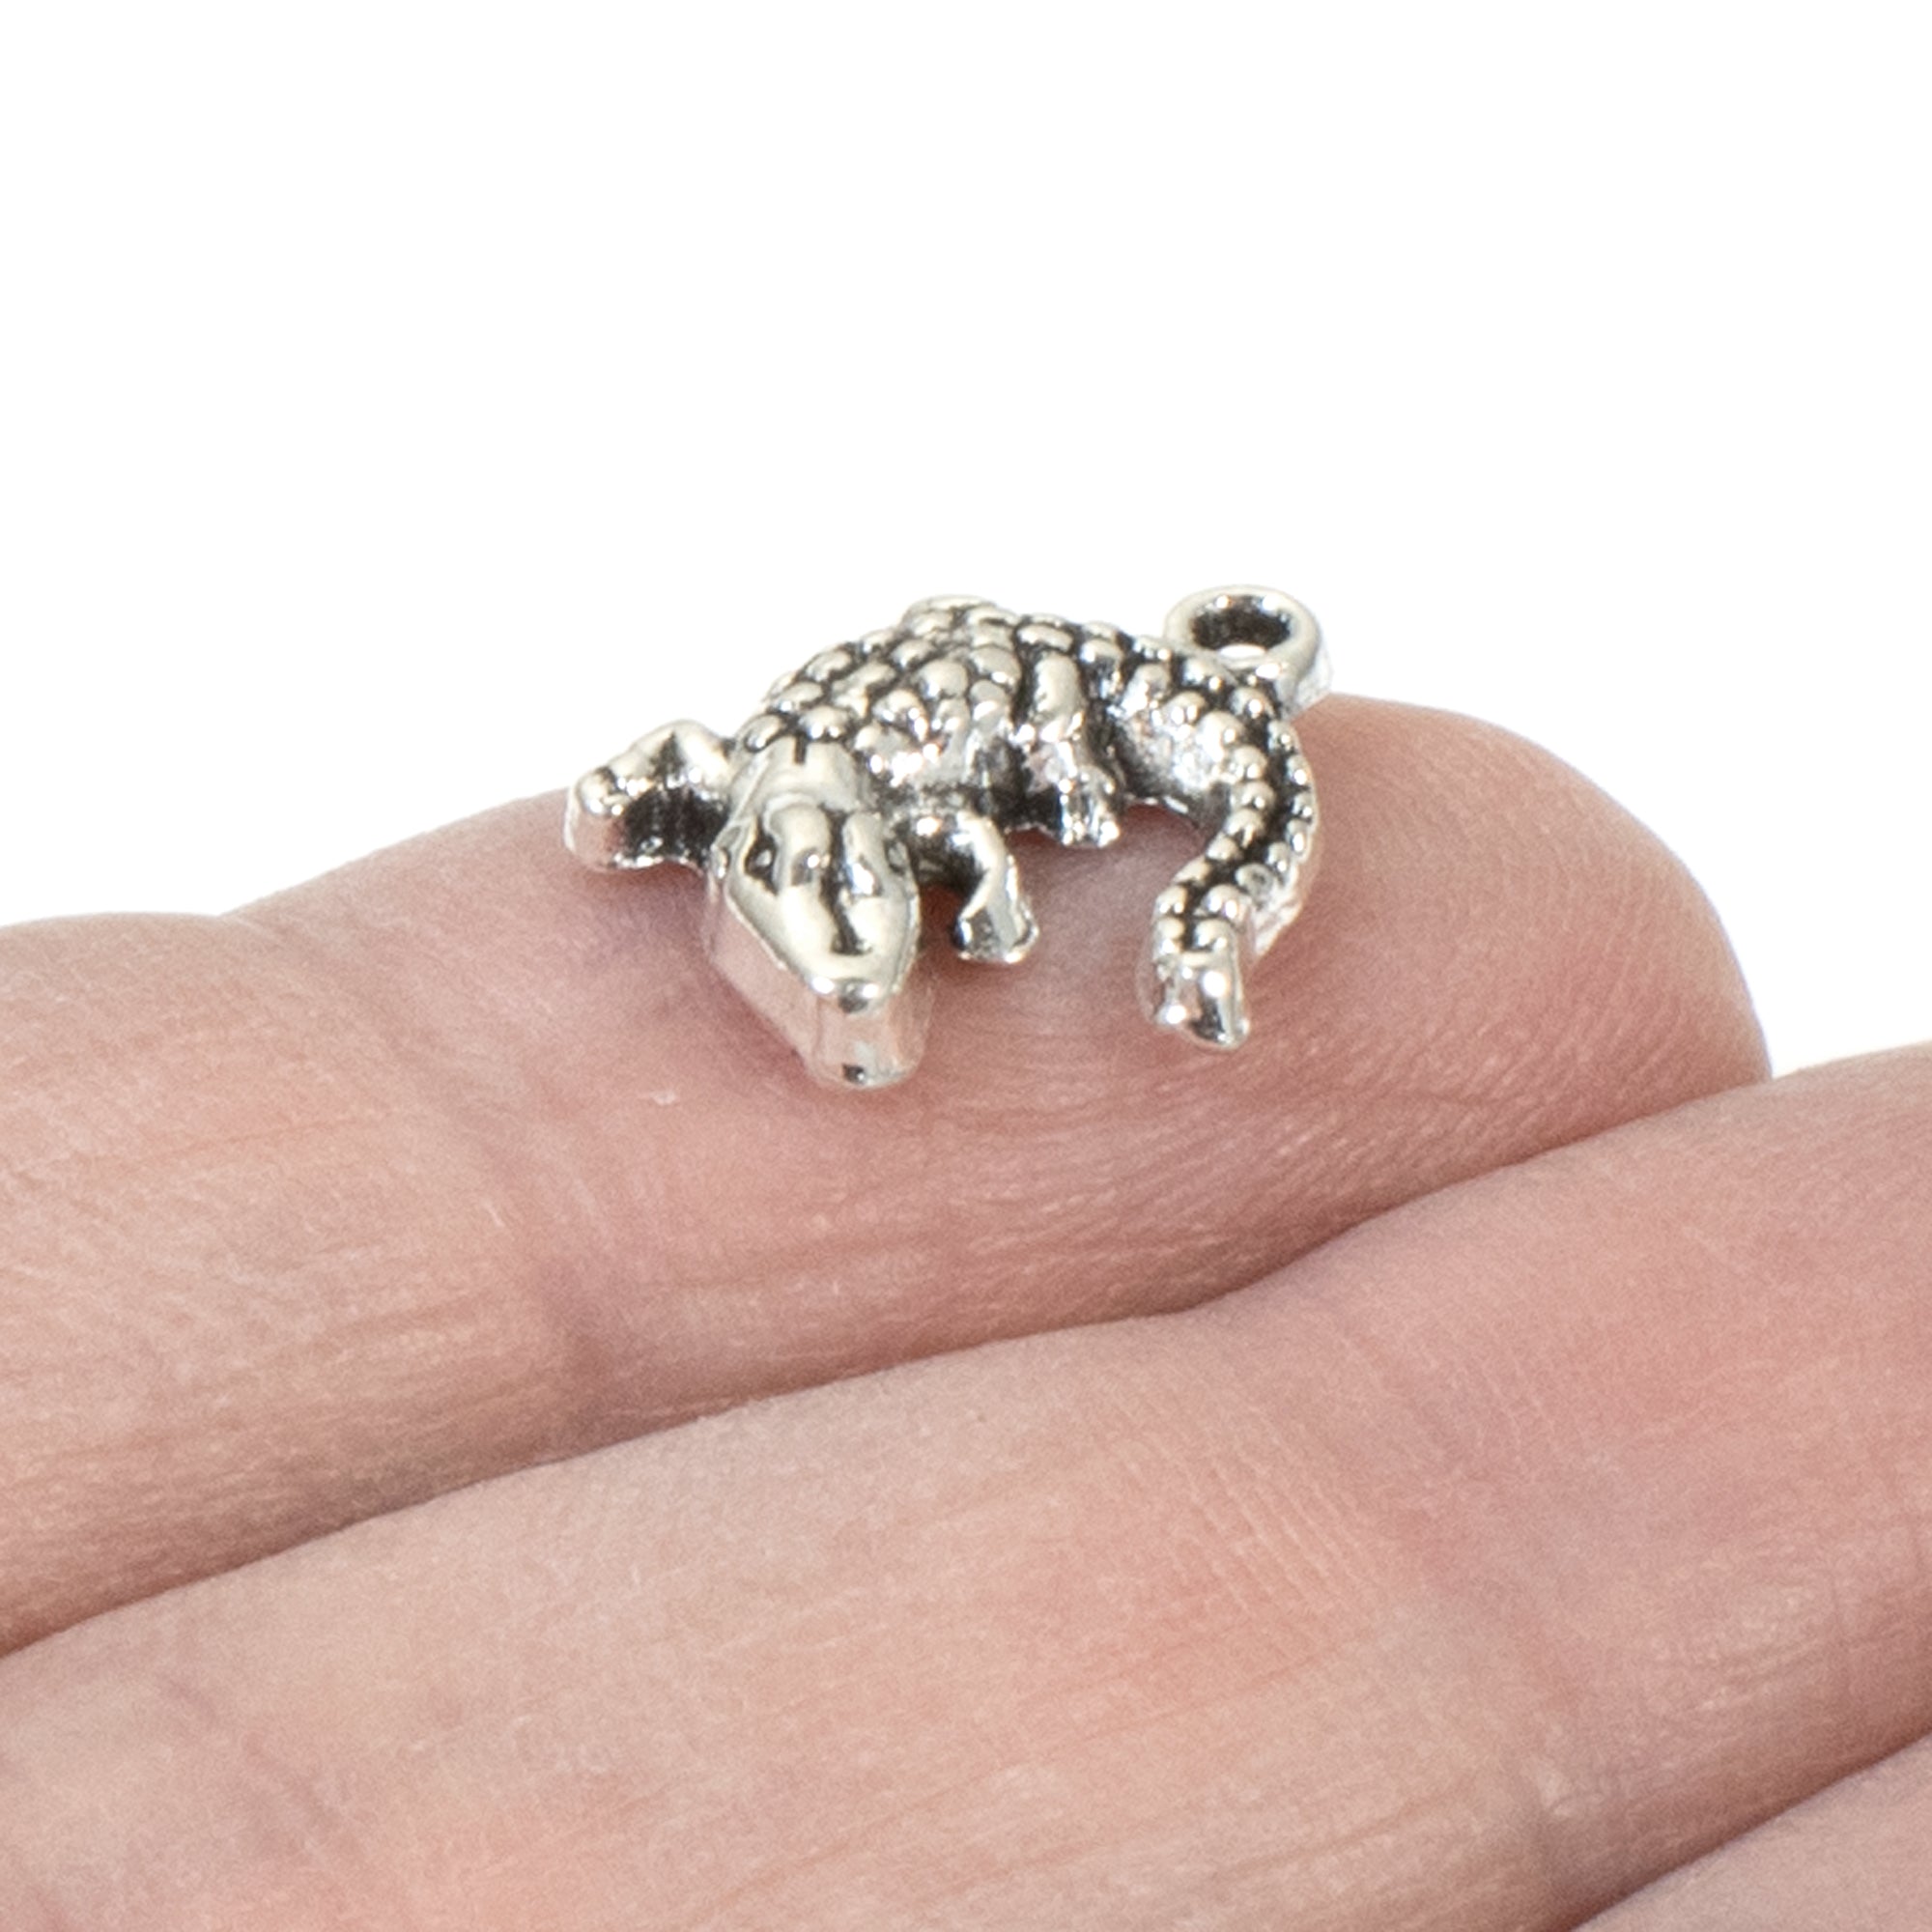 Wholesale Animal Charms for Jewelry Making - TierraCast